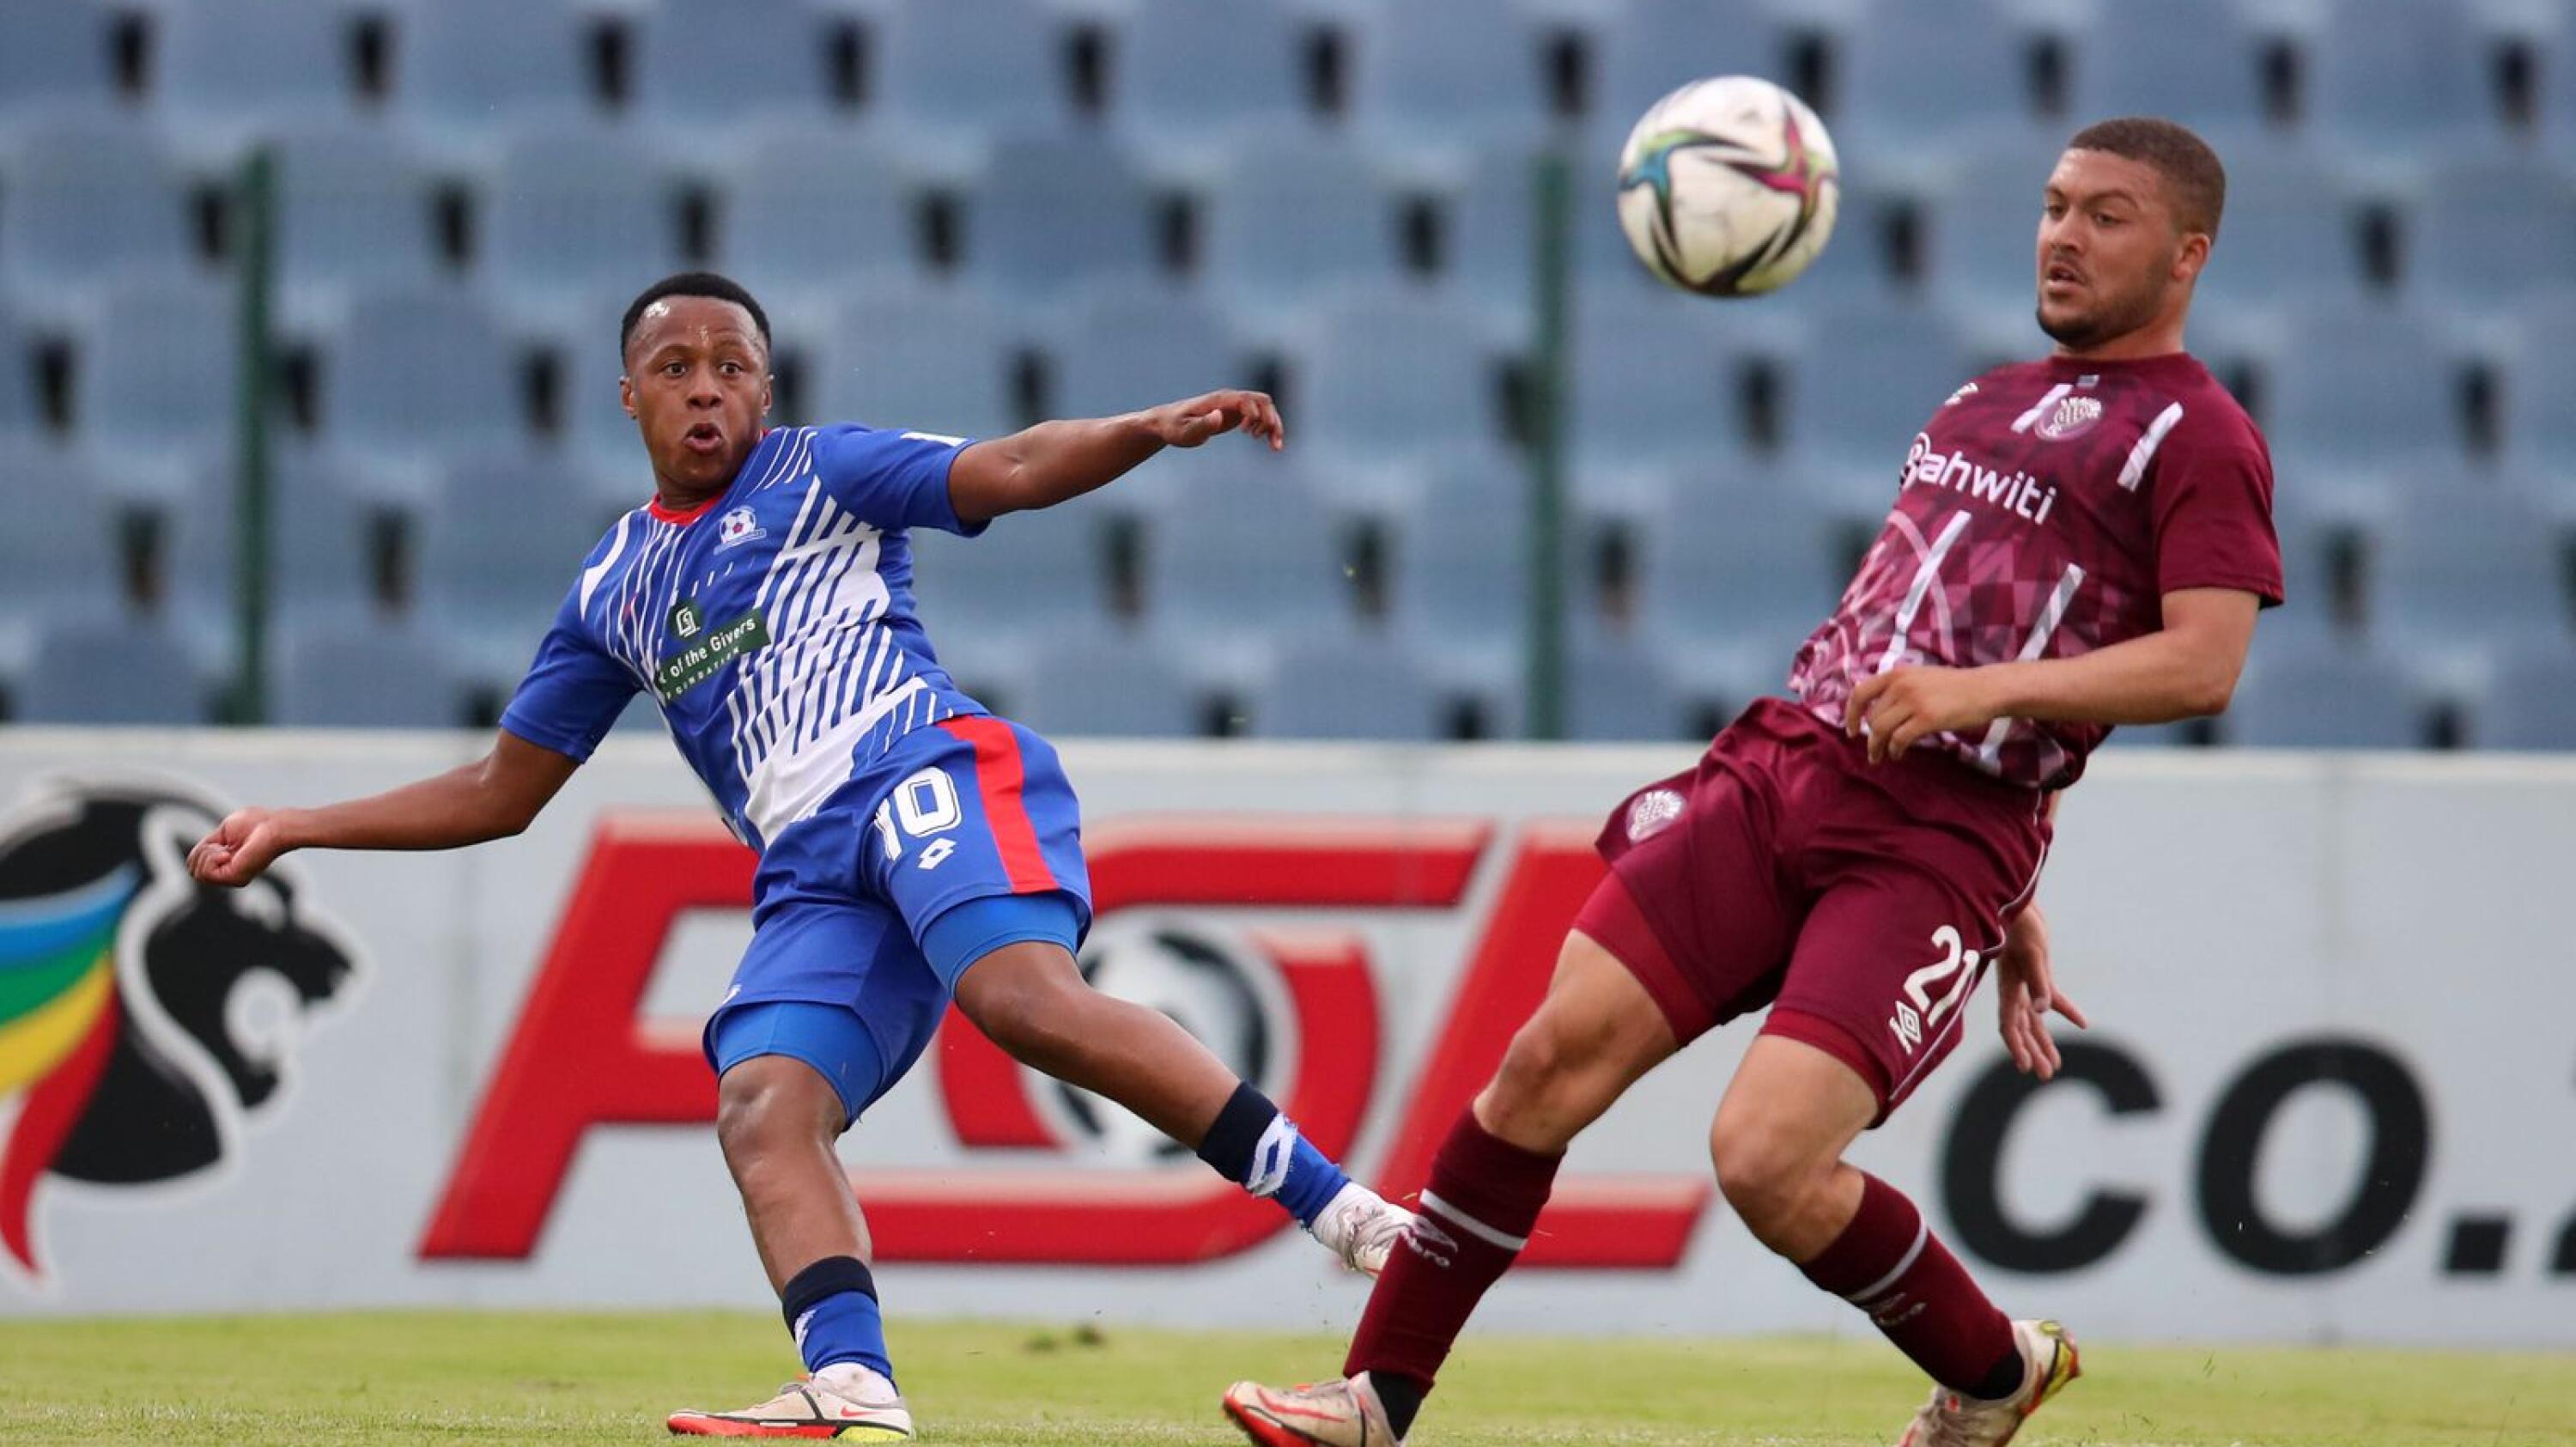 Rowan Human of Maritzburg United is challenged by Grant Margeman of Swallows FC during their DStv Premiership match at the Dobsonville Stadium in Soweto on Saturday